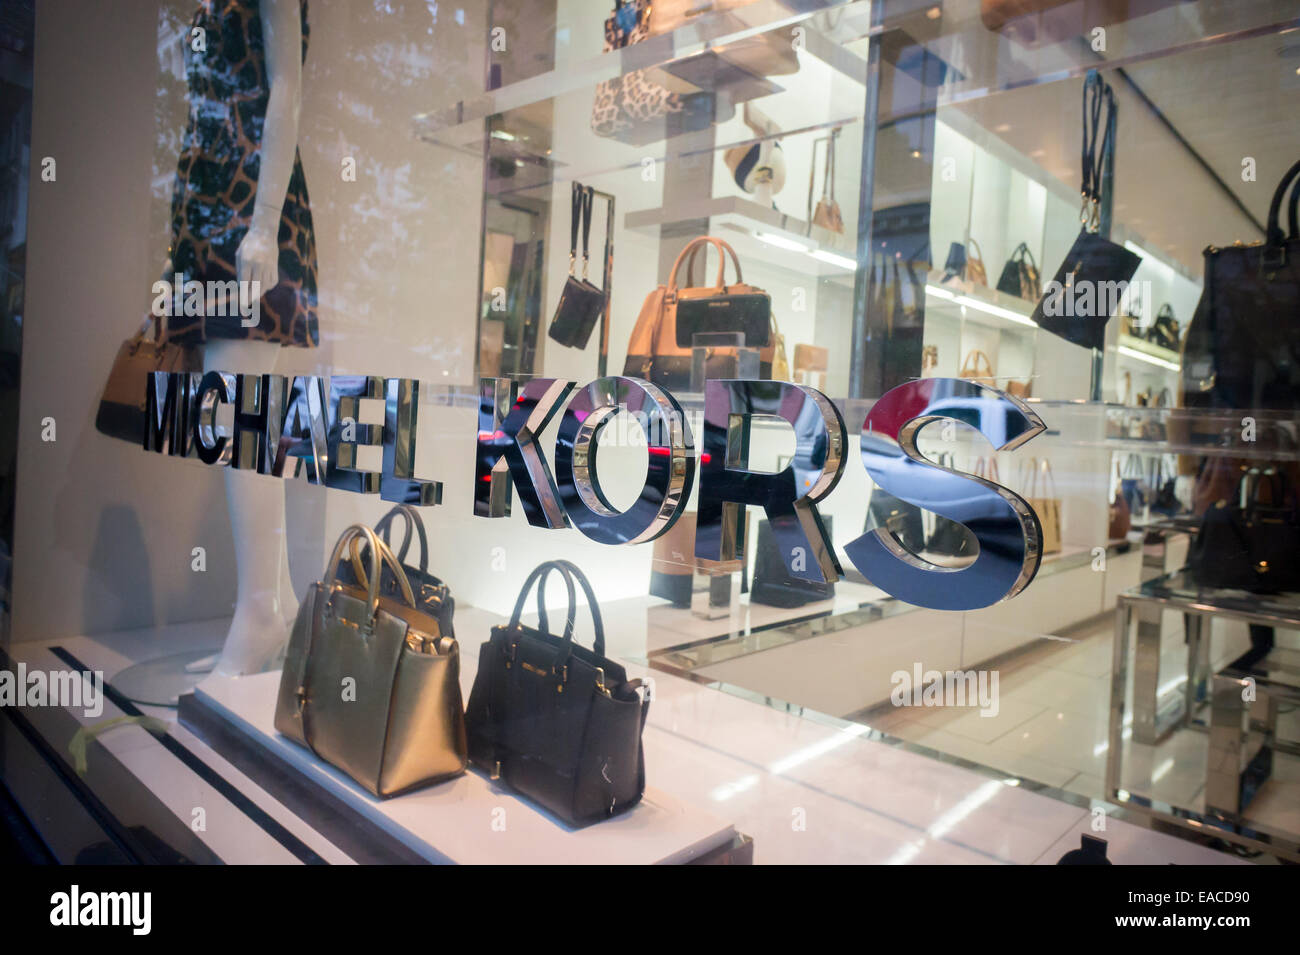 Handbags on display at the Michael Kors boutique within Macy's in New York  on Tuesday, August 4, 2015. First-quarter sales and profits for Michael  Kors handbag designer beat analysts' expectations, albeit low